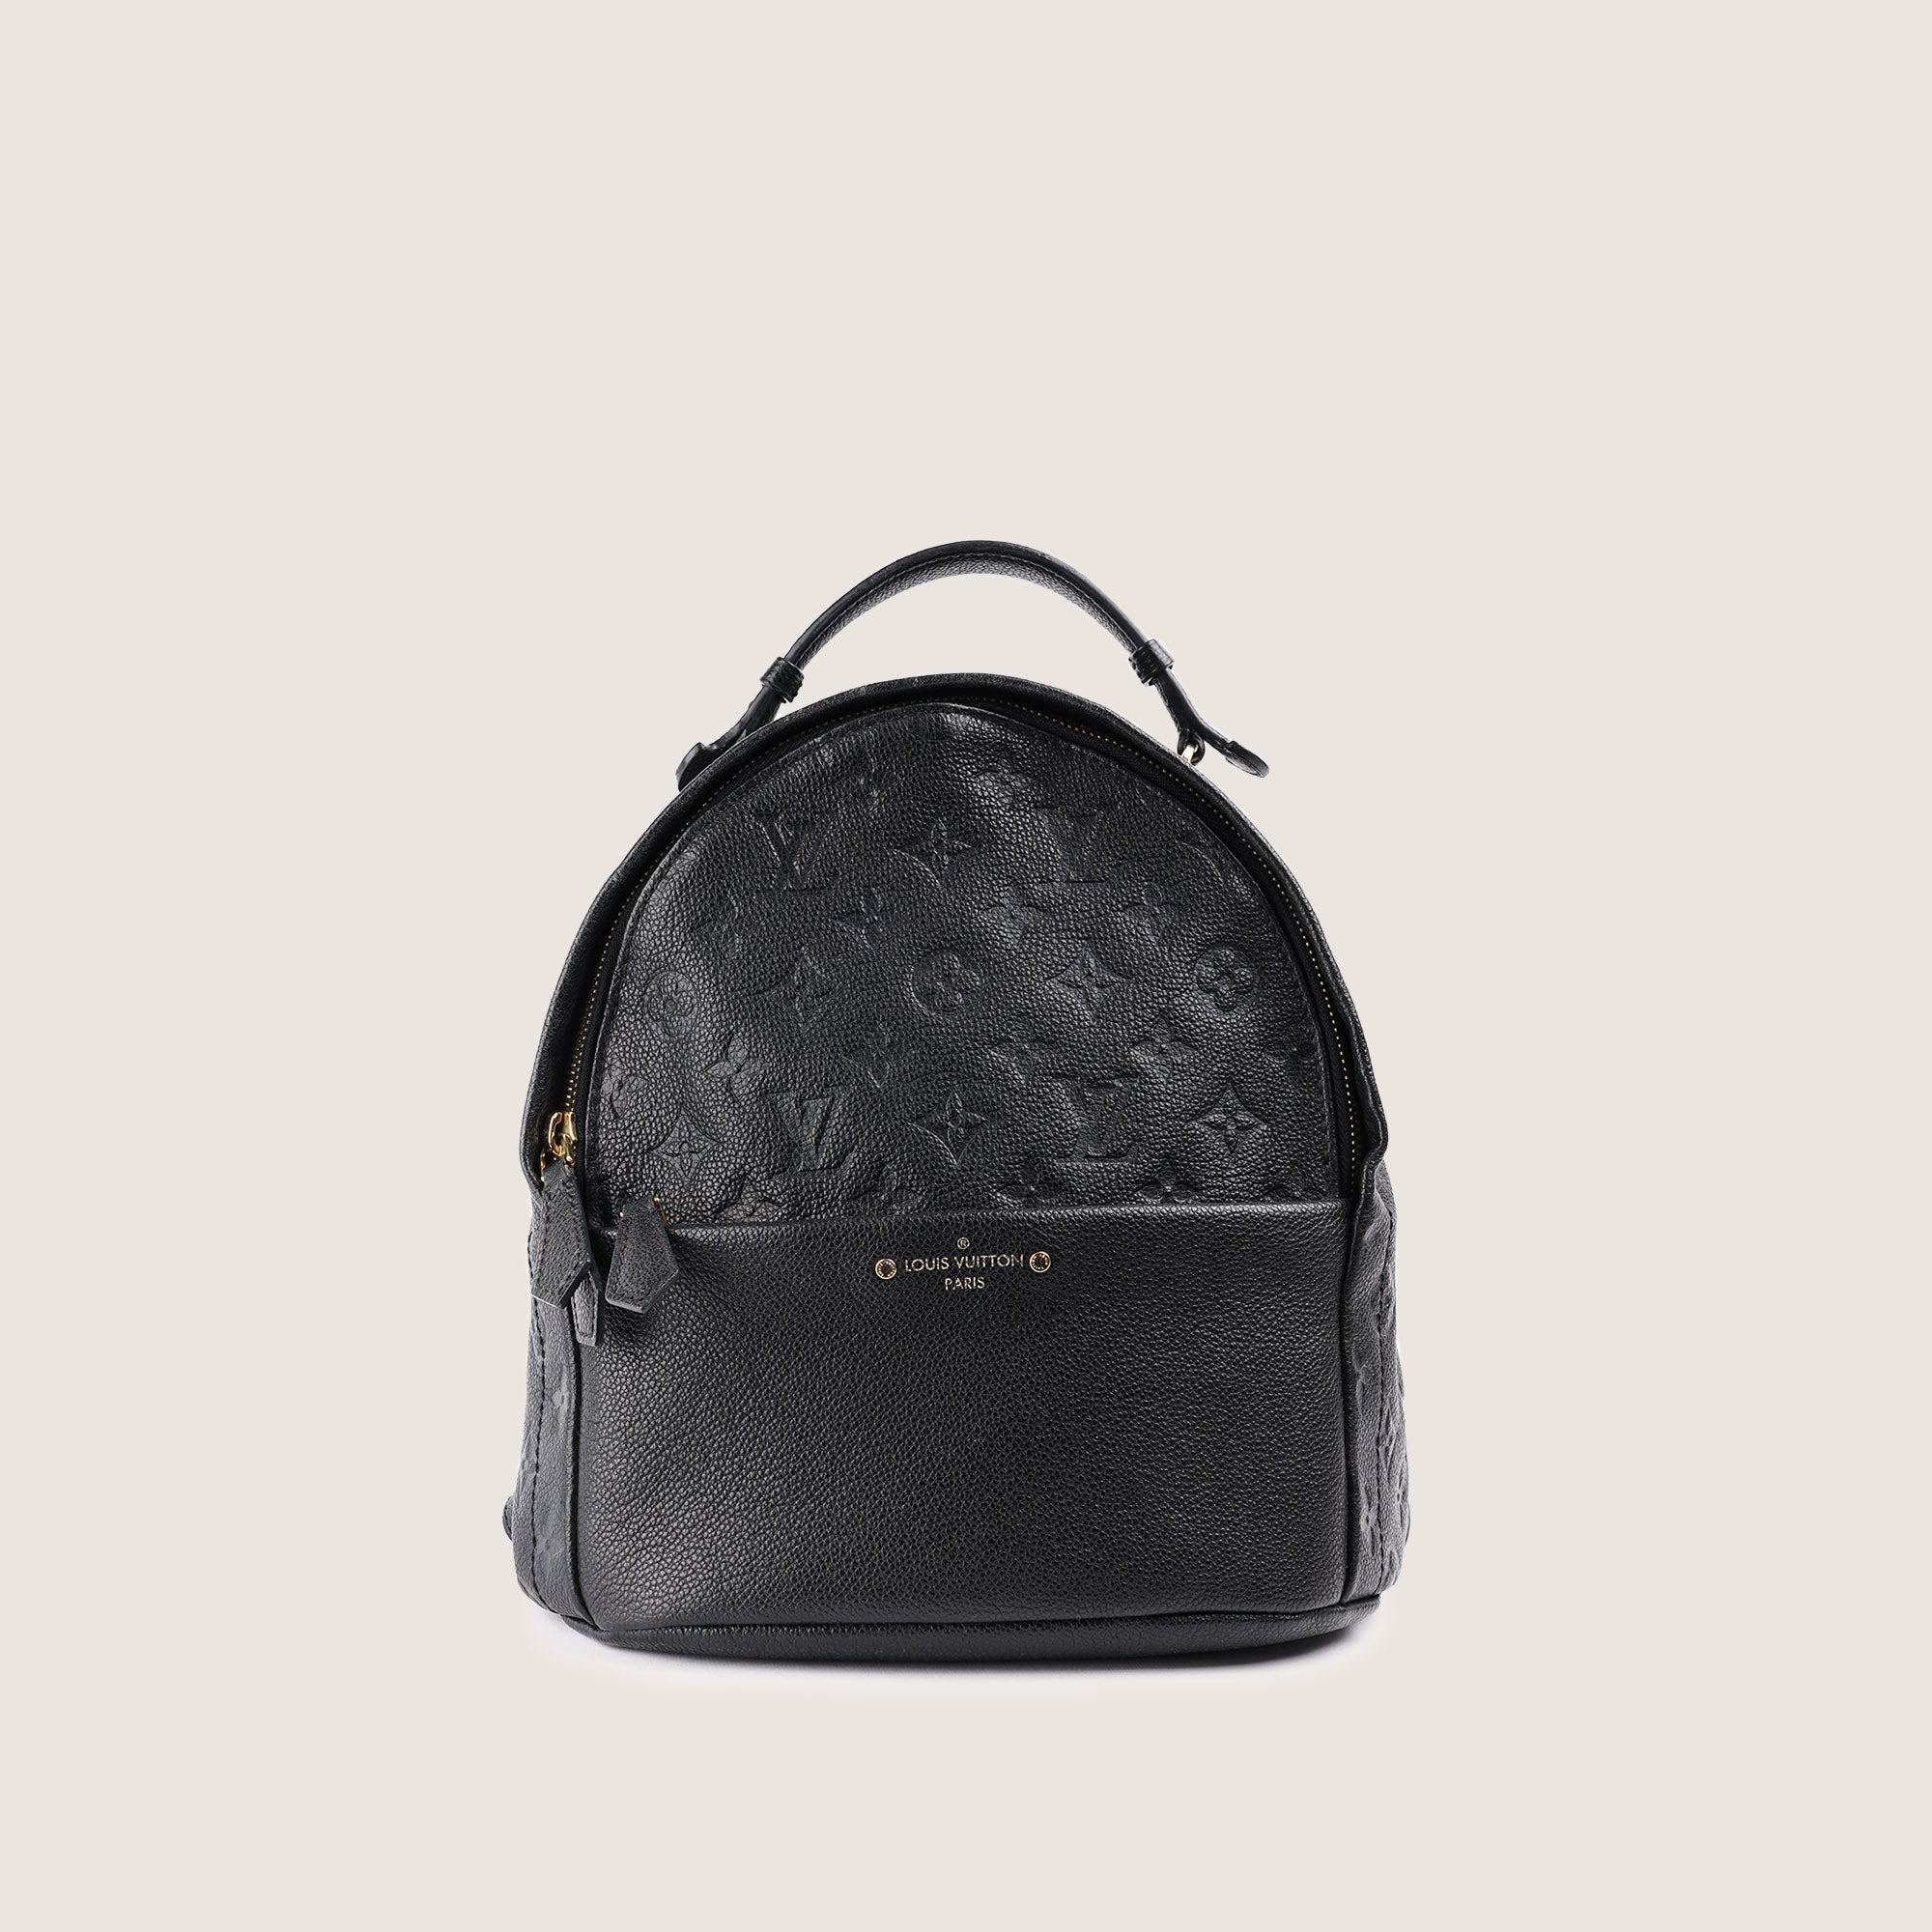 Sorbonne Backpack - LOUIS VUITTON - Affordable Luxury